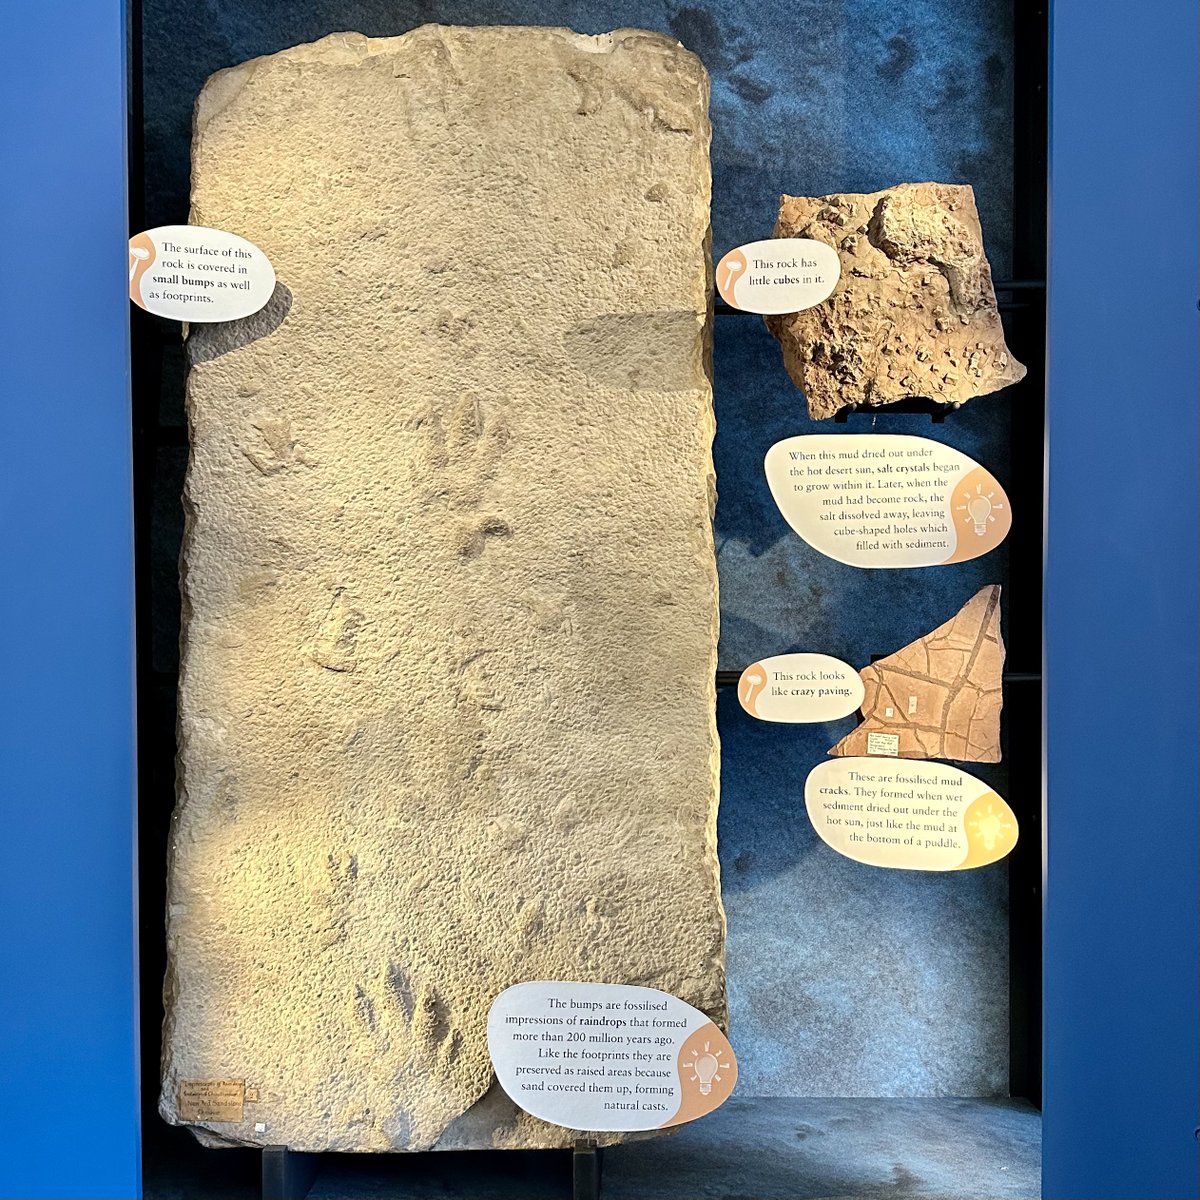 Many of us are familiar with body fossils (e.g: dinosaur bones), but did you know that the behaviour of prehistoric life can be preserved as trace fossils? These 200 million year old Chirotherium footprints from the Triassic are trace fossils! 👣 #FossilFriday #TraceFossils